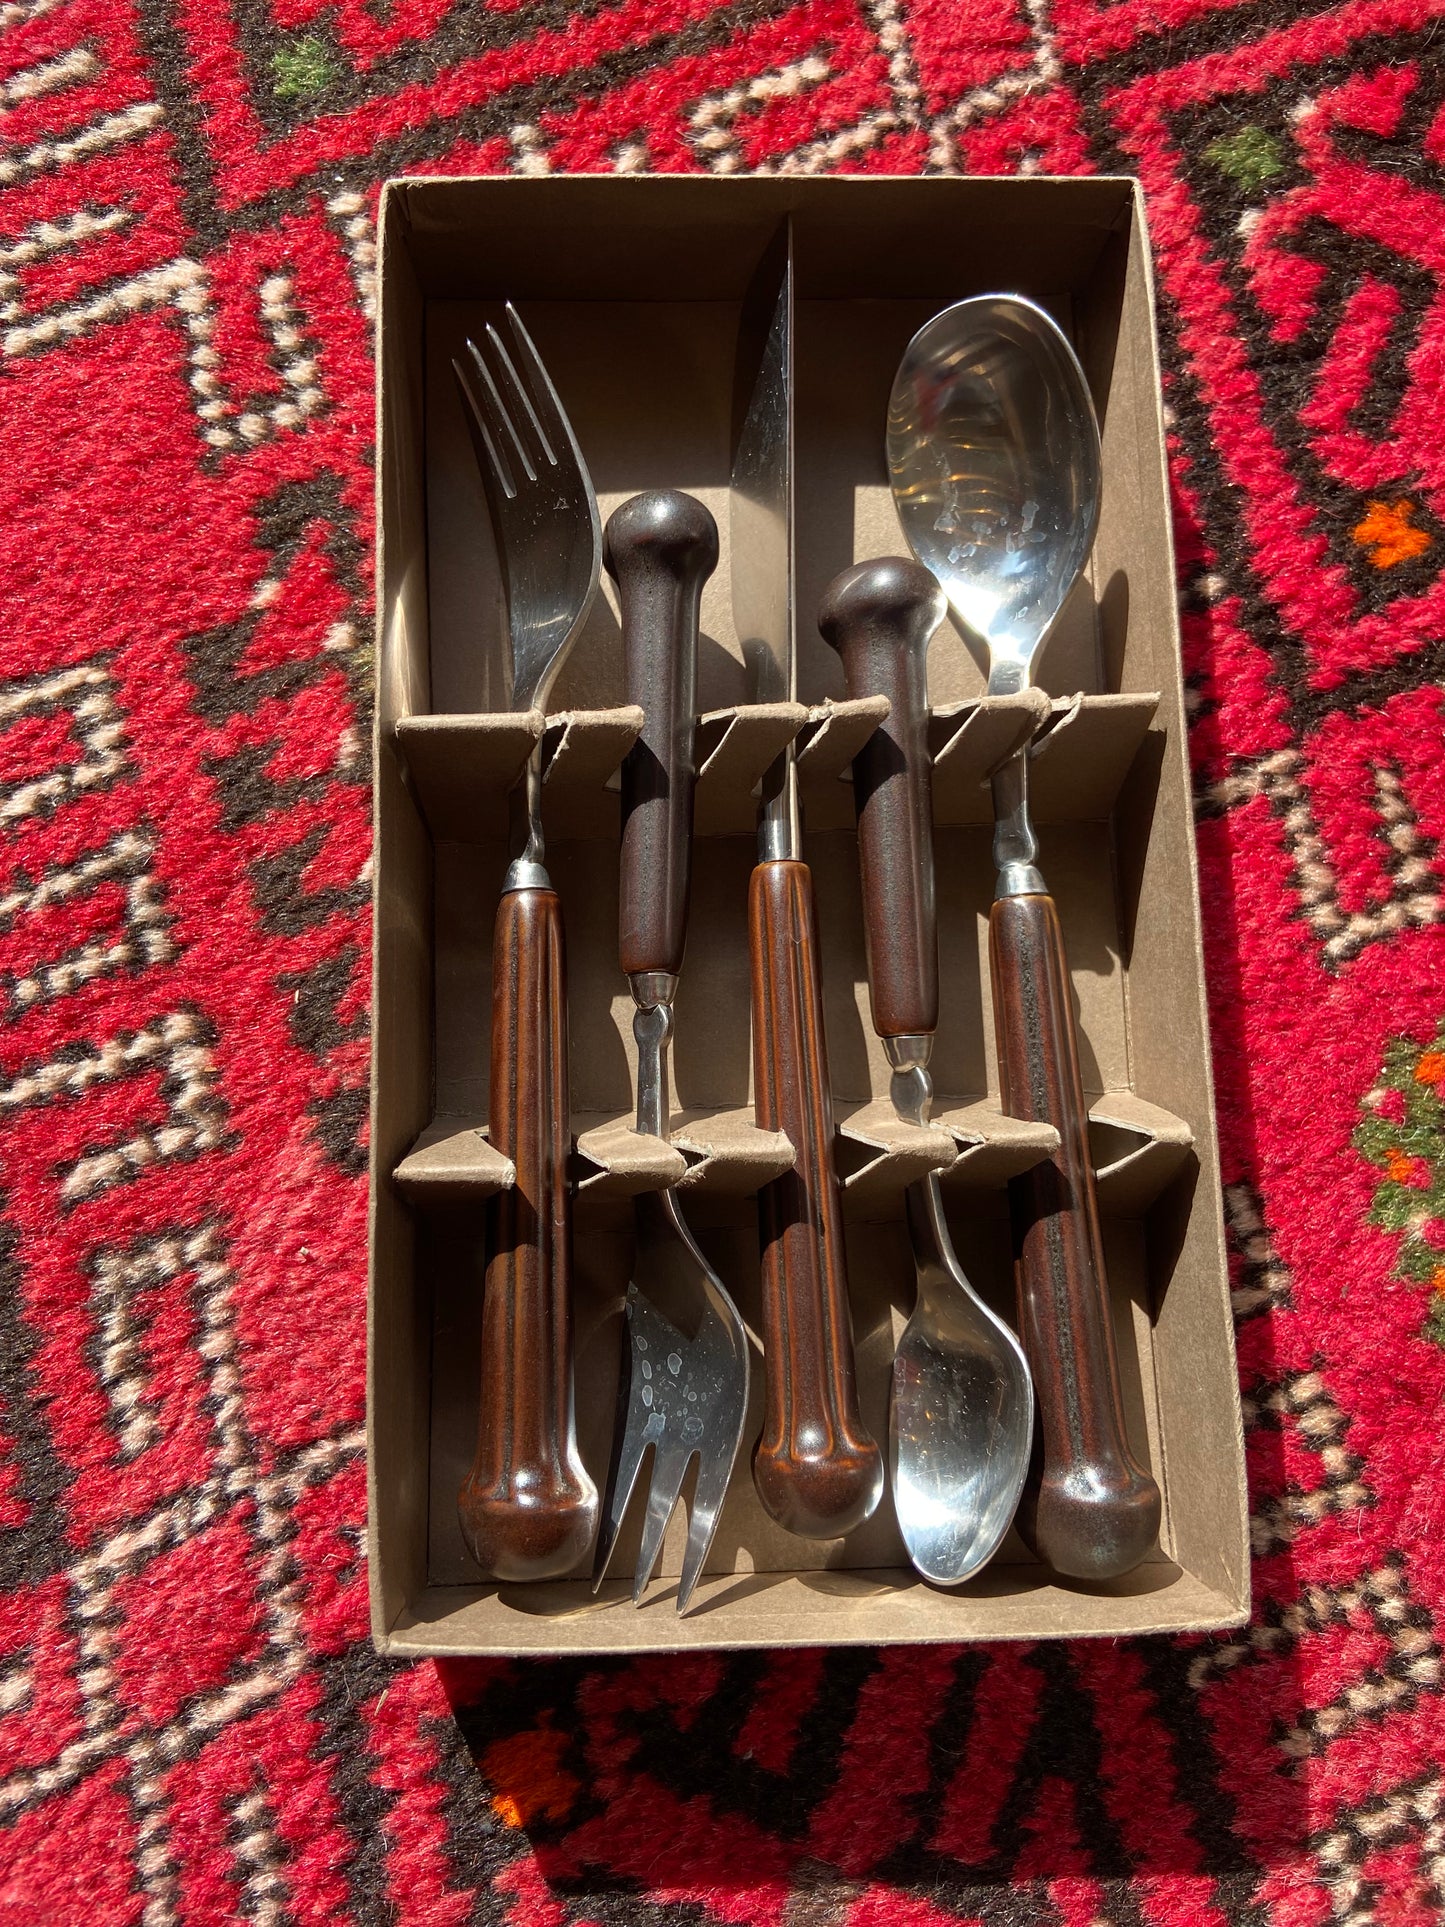 Denby Stone and Steel Silverware (25308)